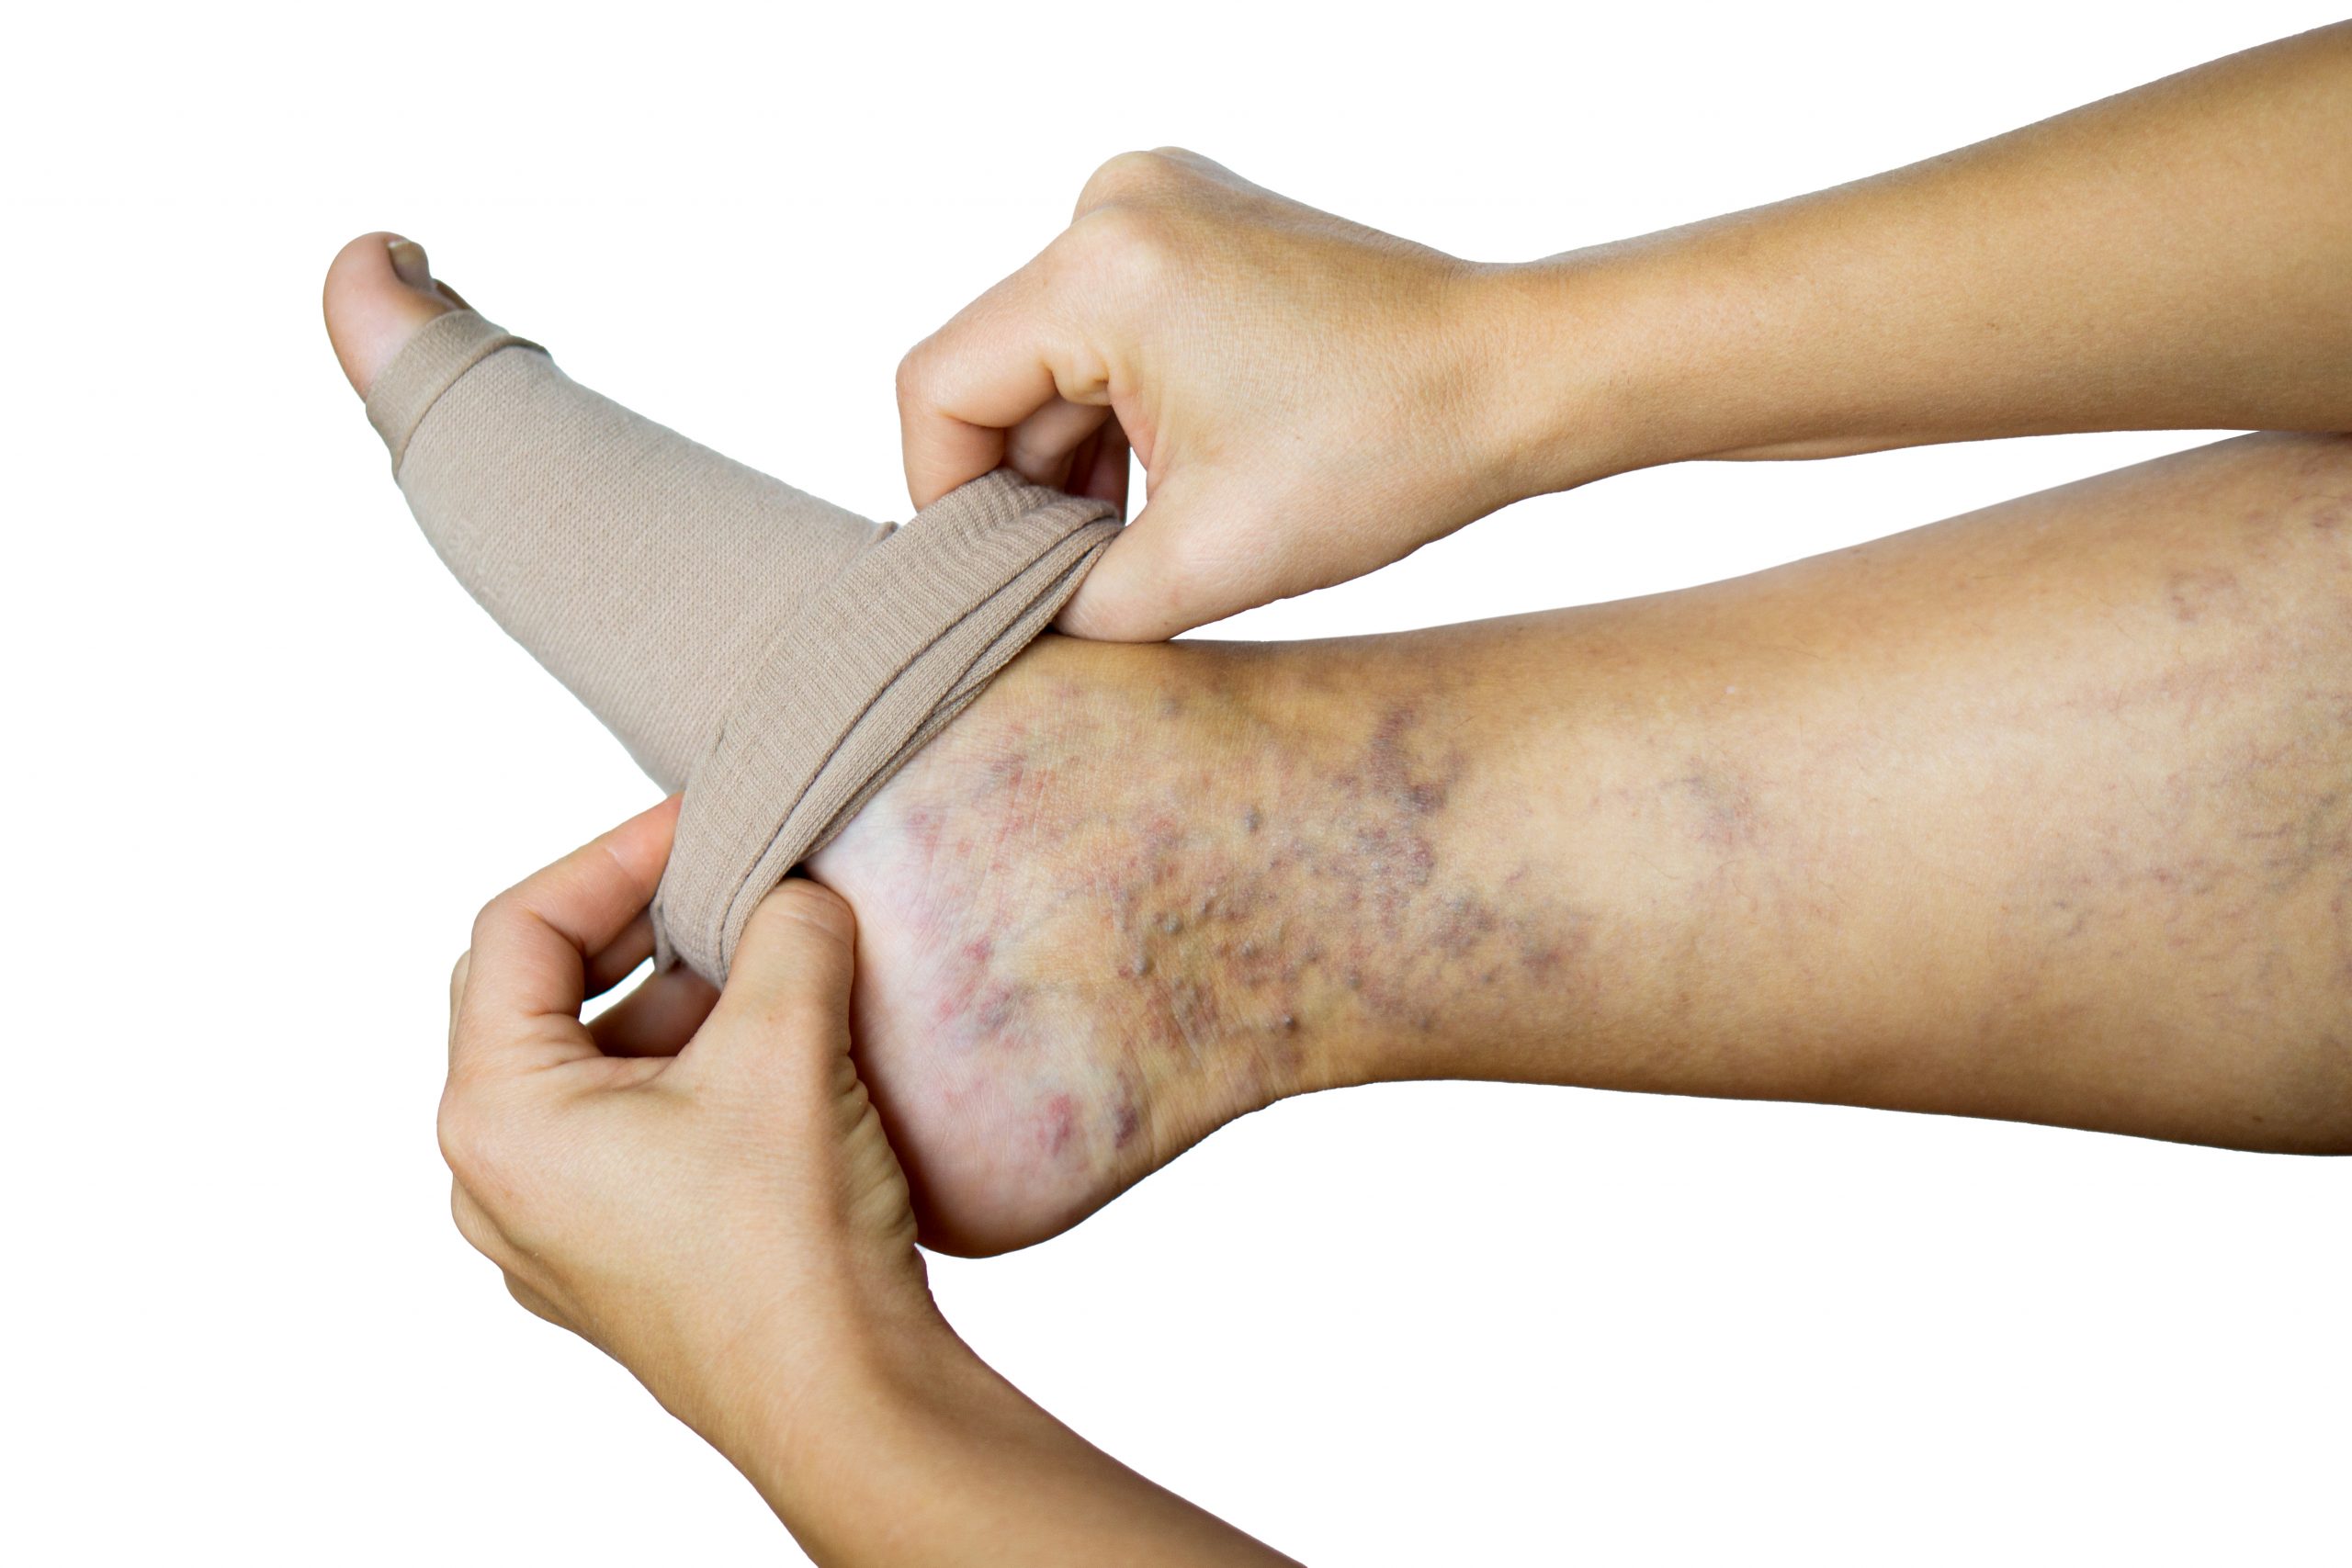 Leg disorders caused by venous insufficiency